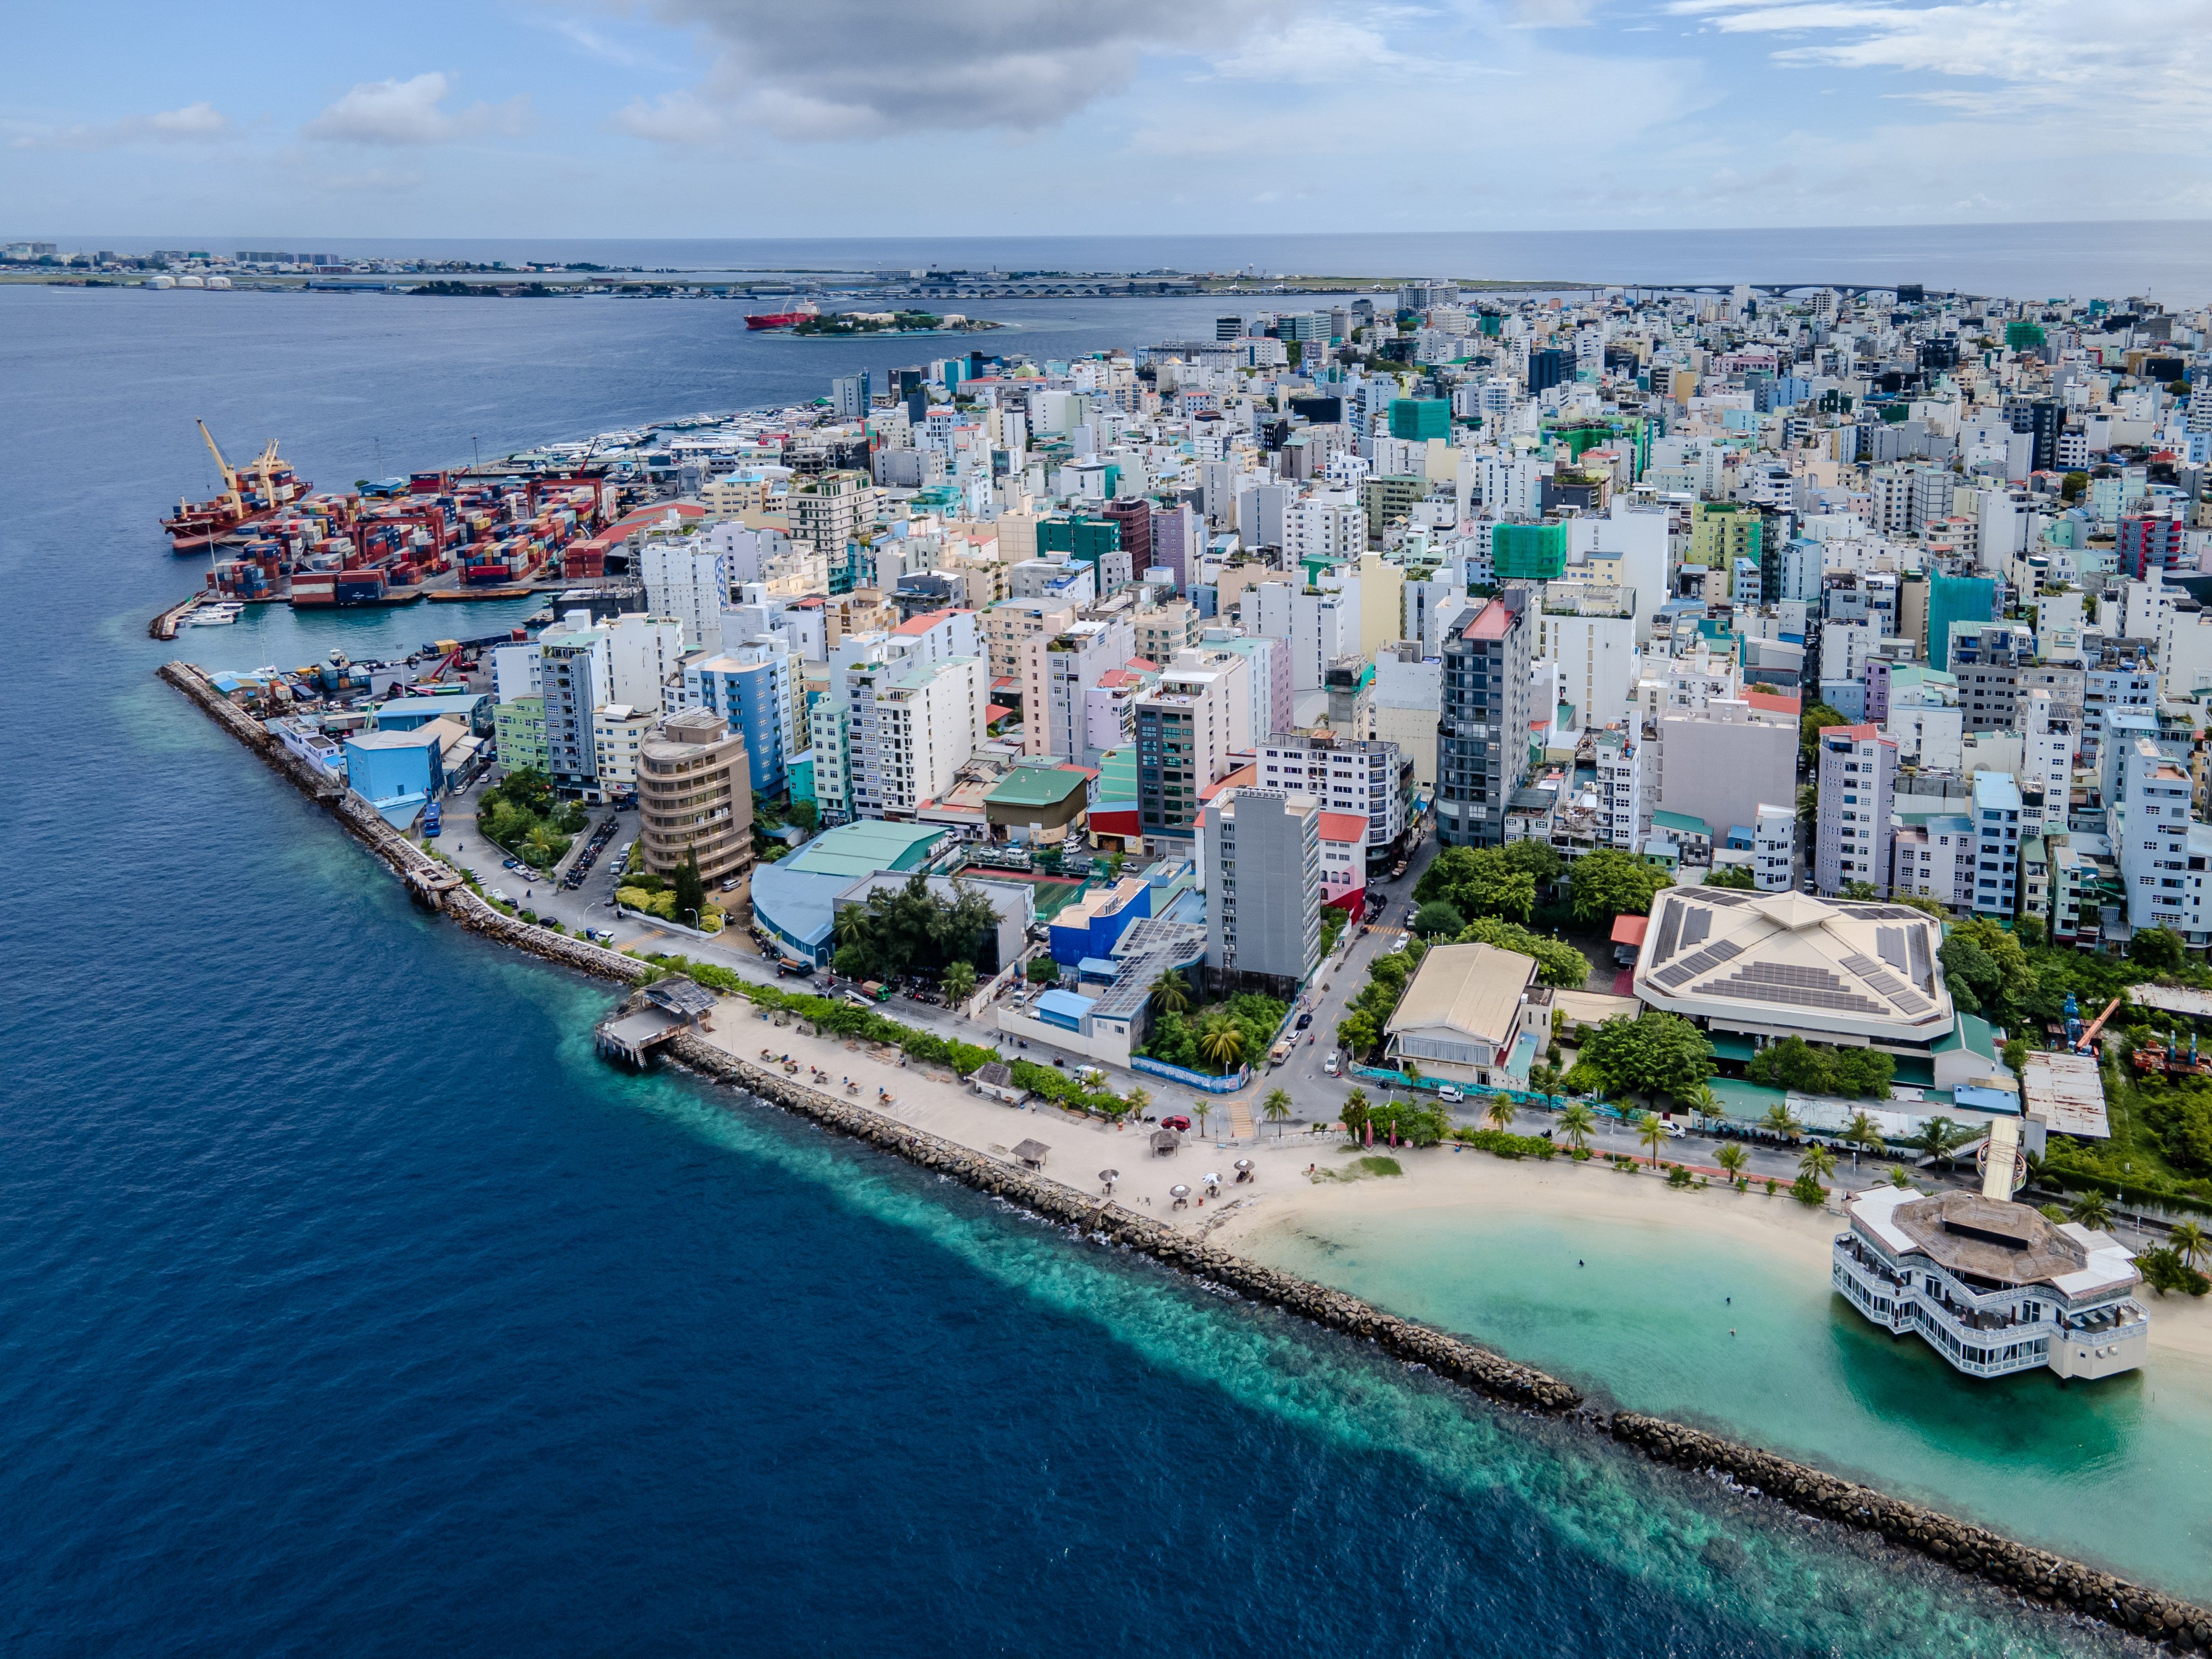 Male, capital of the Maldives. Indian considers the archipelago nation, which is situated along key shipping routes, part of its sphere of influence. Photo: Getty